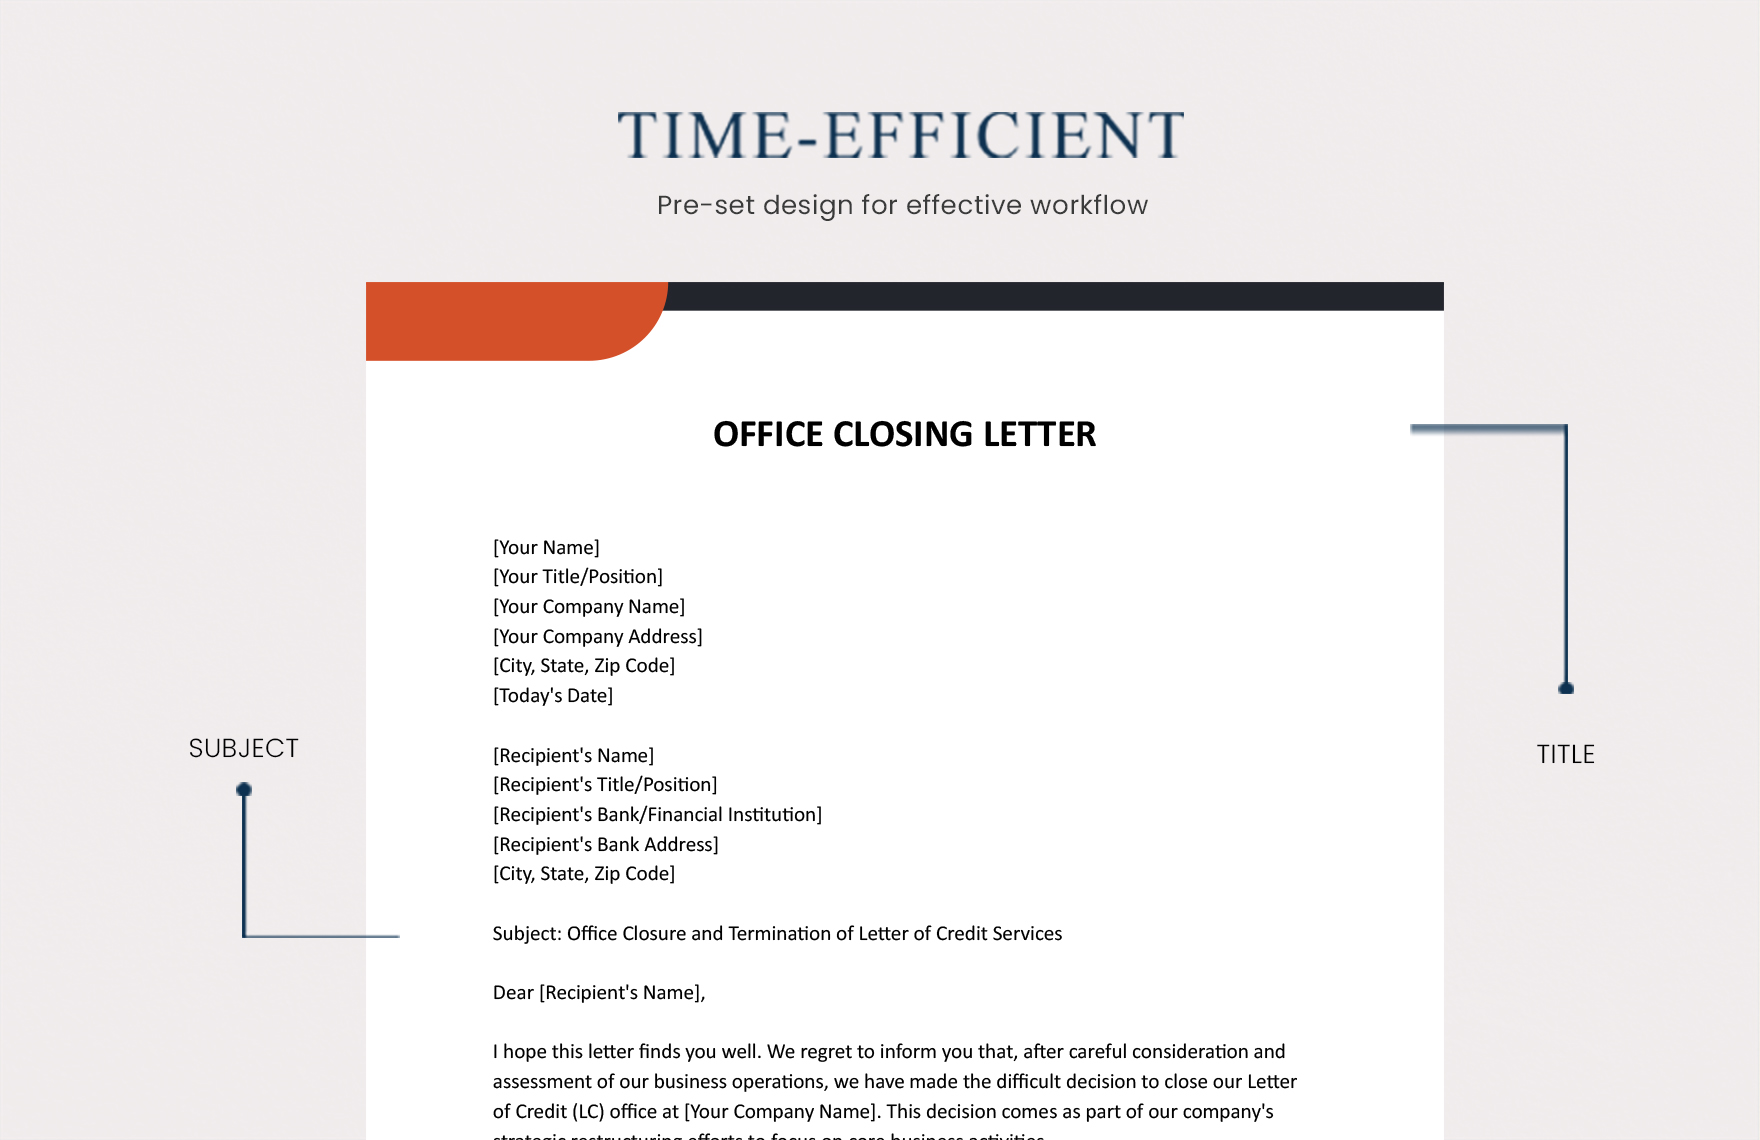 Office Closing Letter